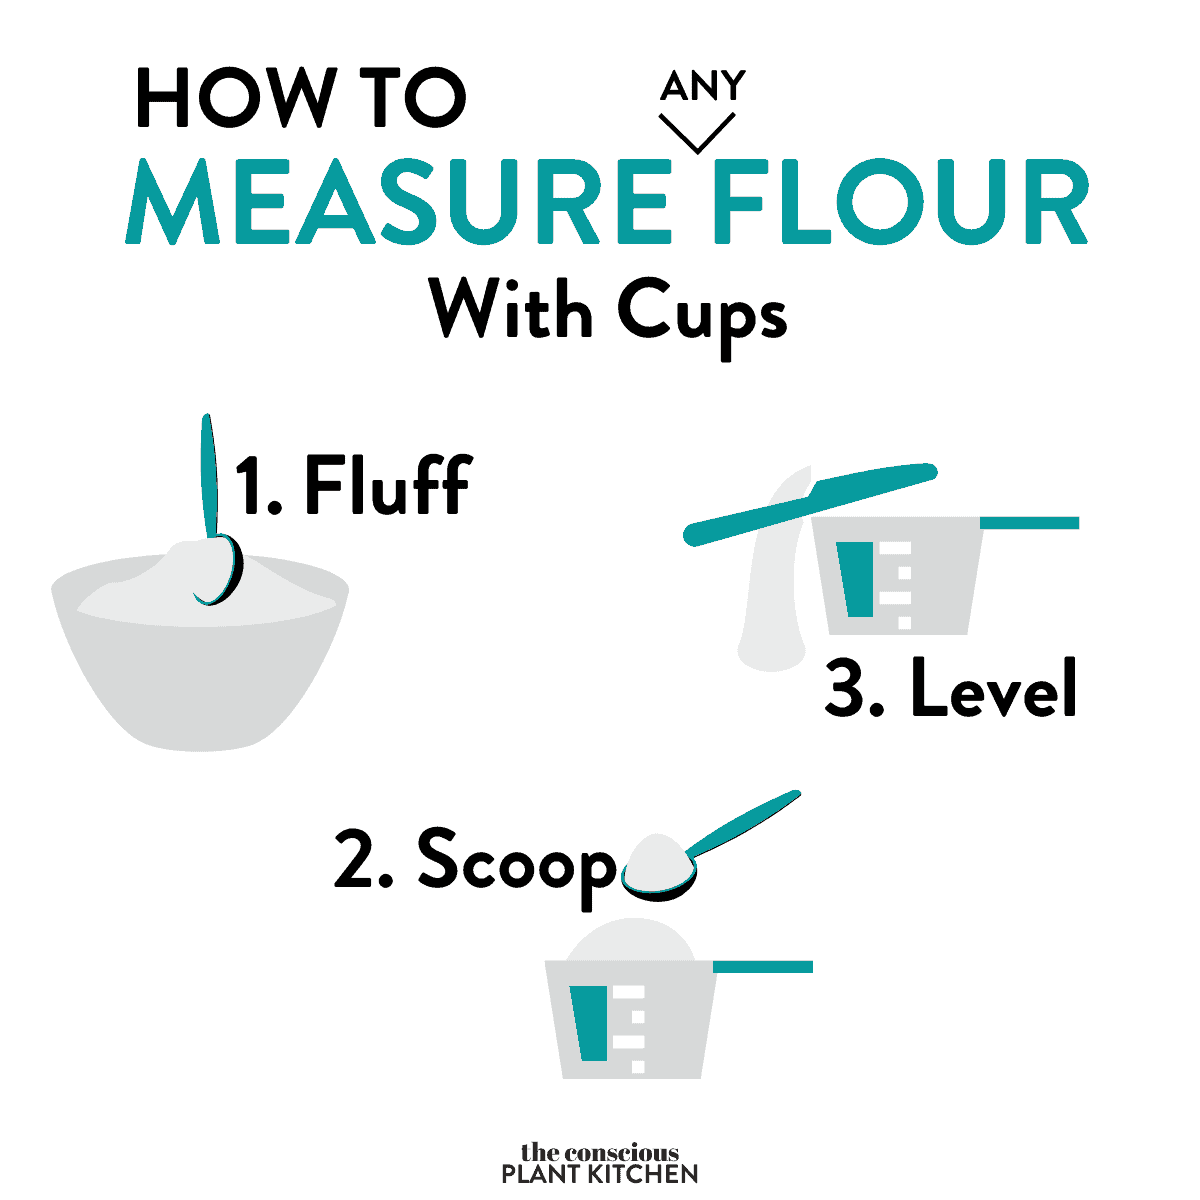 https://www.theconsciousplantkitchen.com/wp-content/uploads/2021/11/How-To-Measure-Flour-With-Cups.png